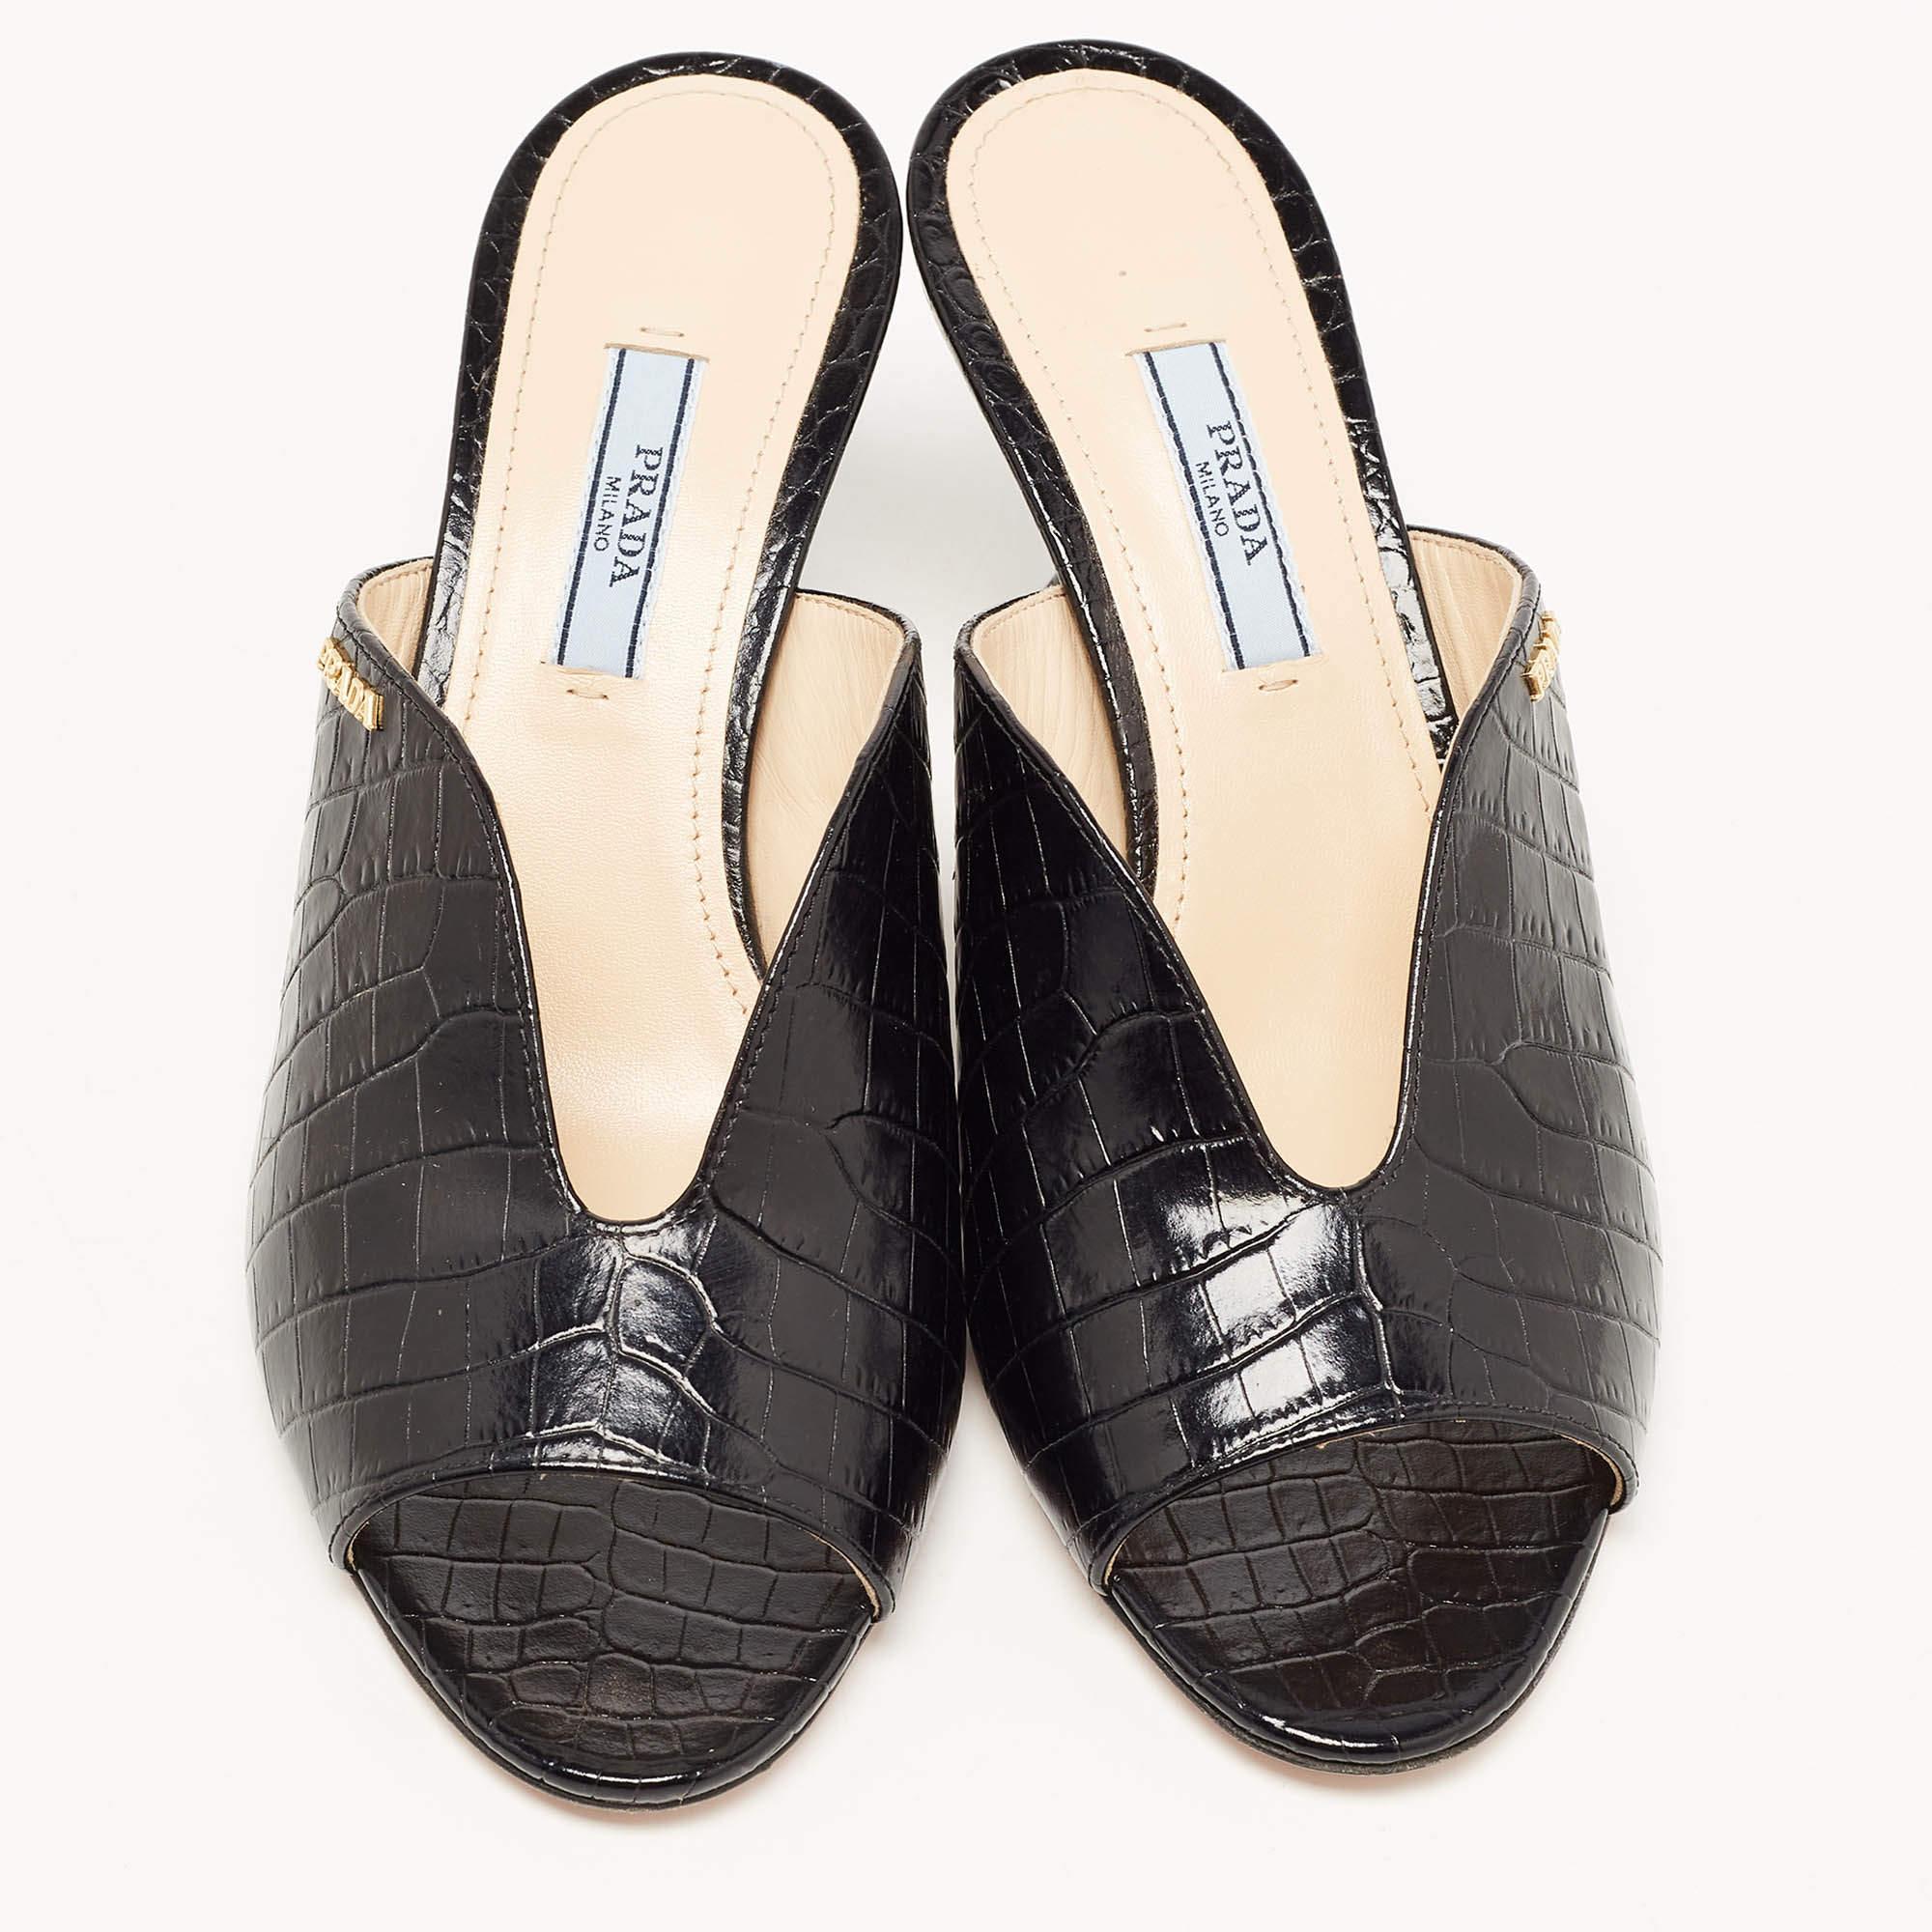 A perfect blend of luxury, style, and comfort, these designer mules are made using quality materials and frame your feet in the most elegant way. They can be paired with a host of outfits from your wardrobe.

Includes: Original Box, Extra Heel Tips,